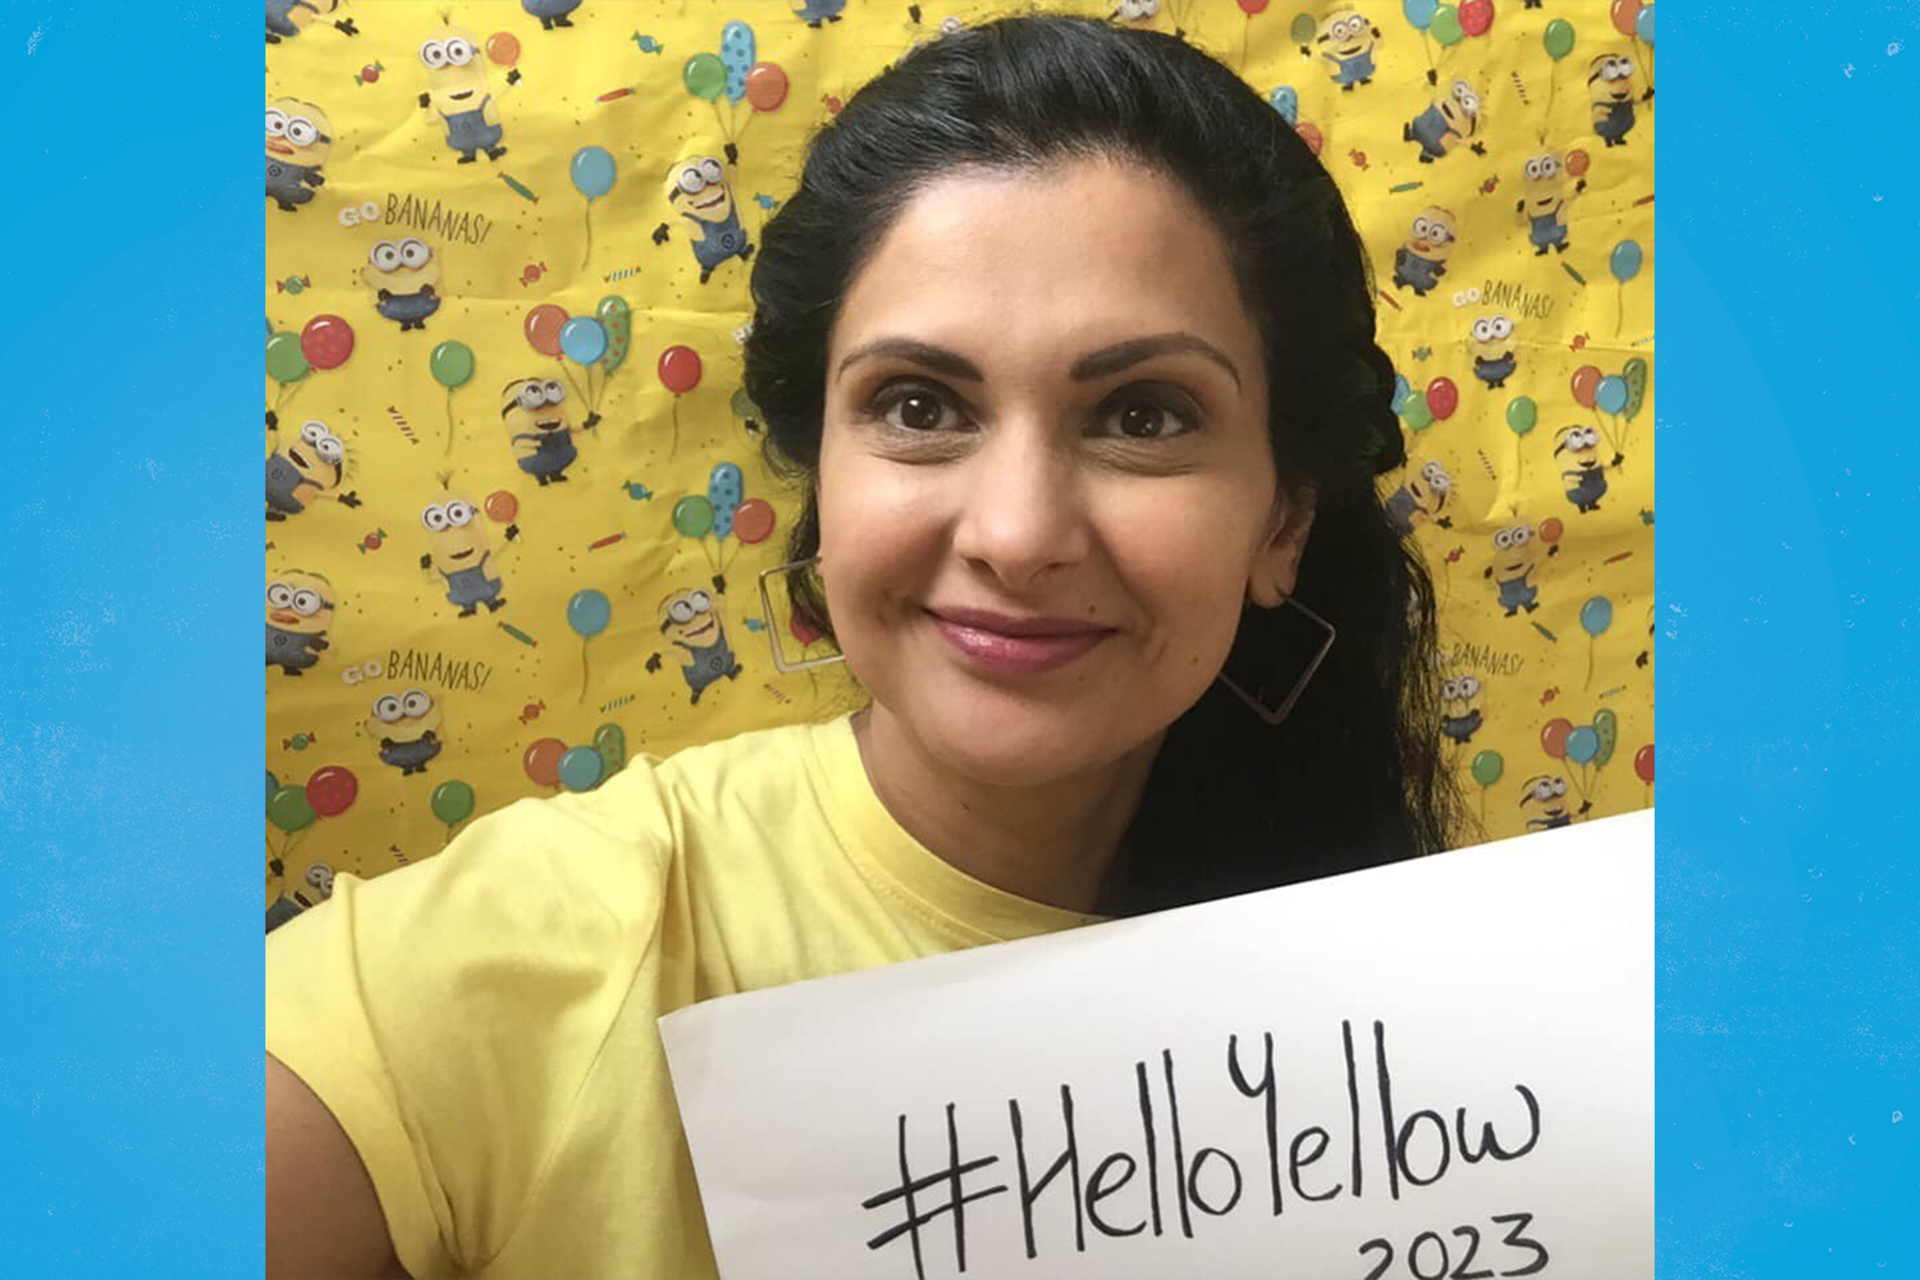 A CAMHS worker from Leeds holding a sign saying #HelloYelow 2023.